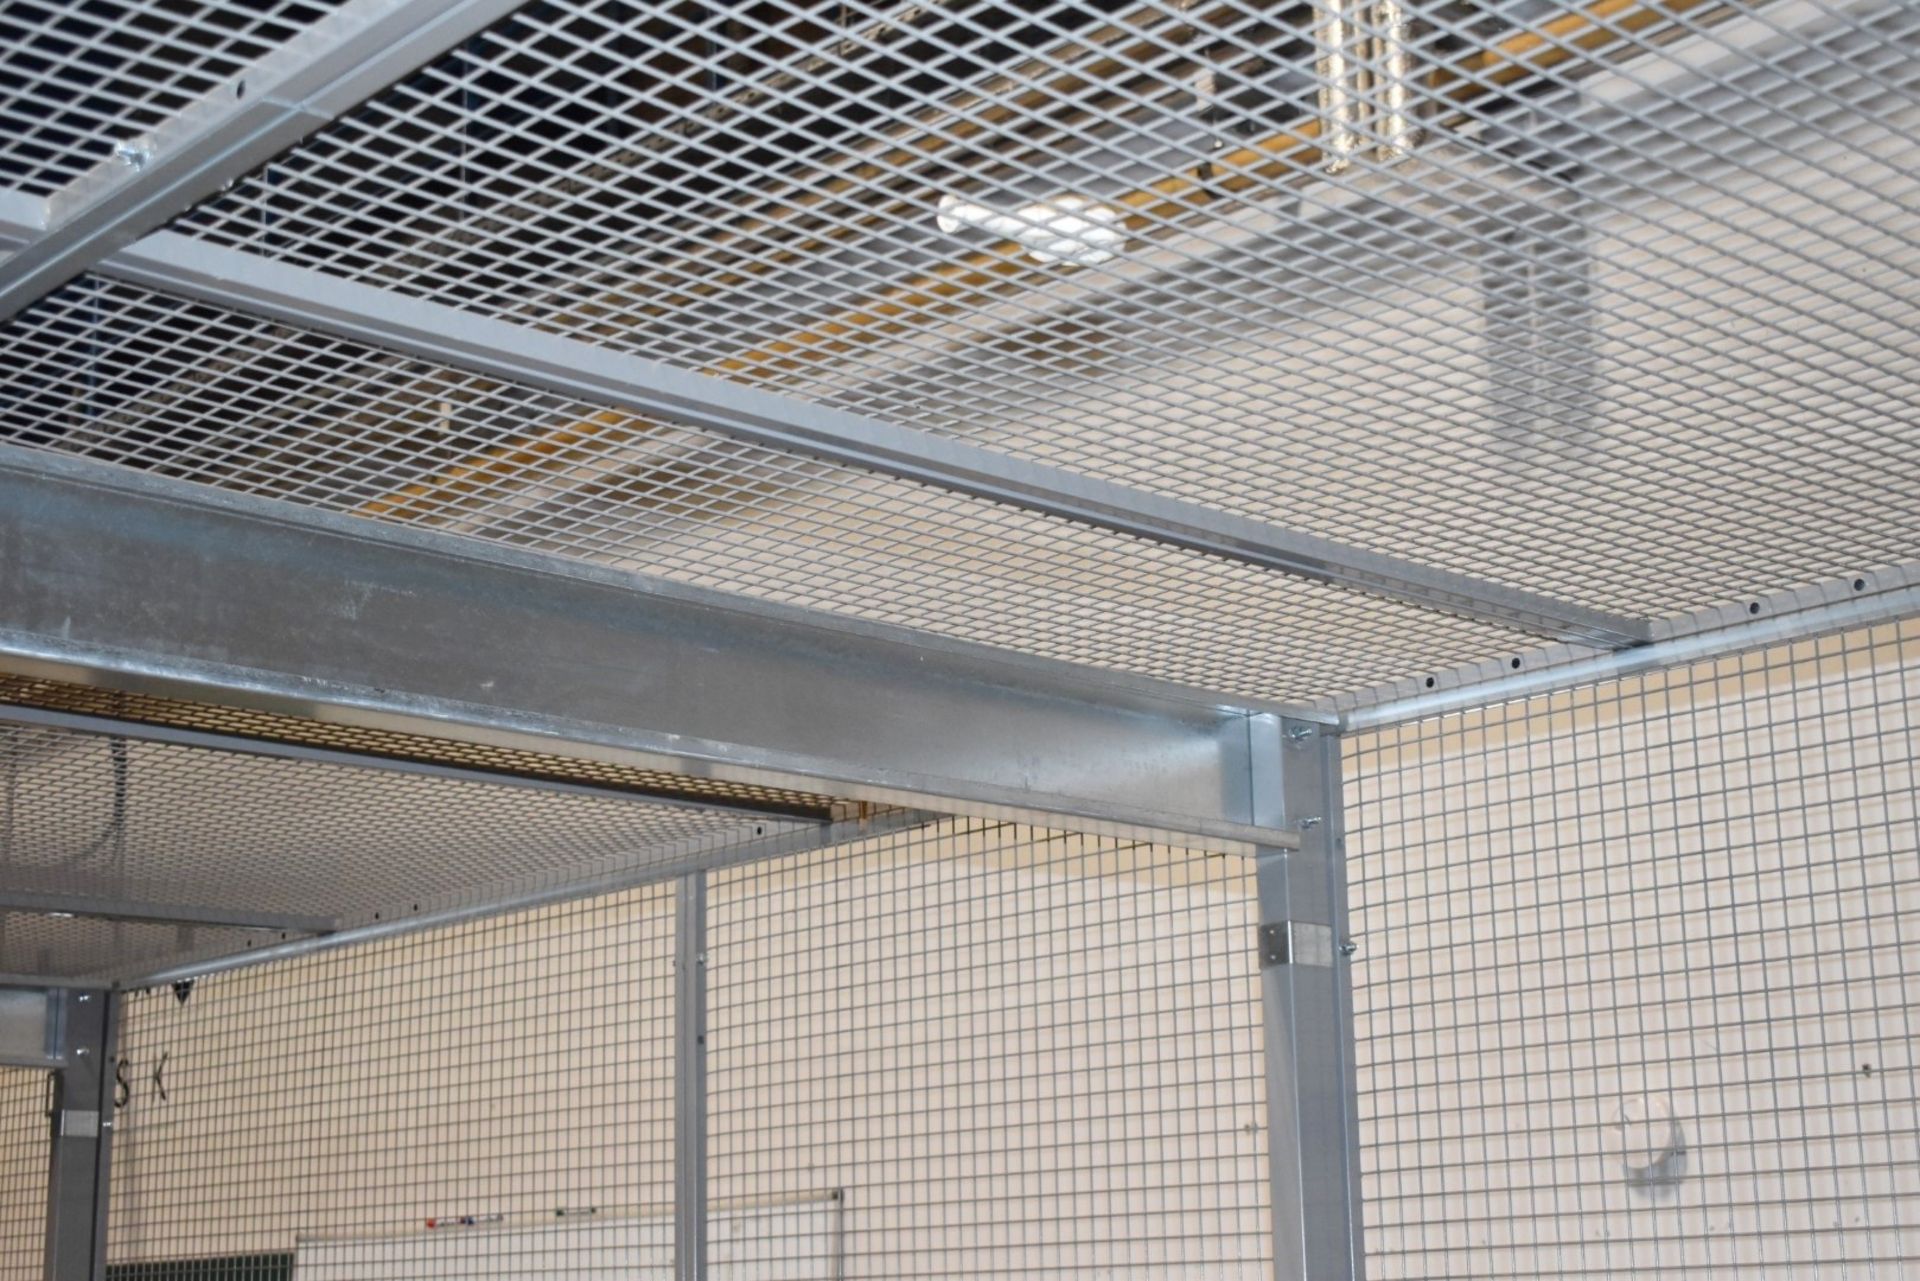 1 x Security Cage Enclosure For Warehouses - Ideal For Storing High-Value Stock or Hazardous Goods - - Image 9 of 12